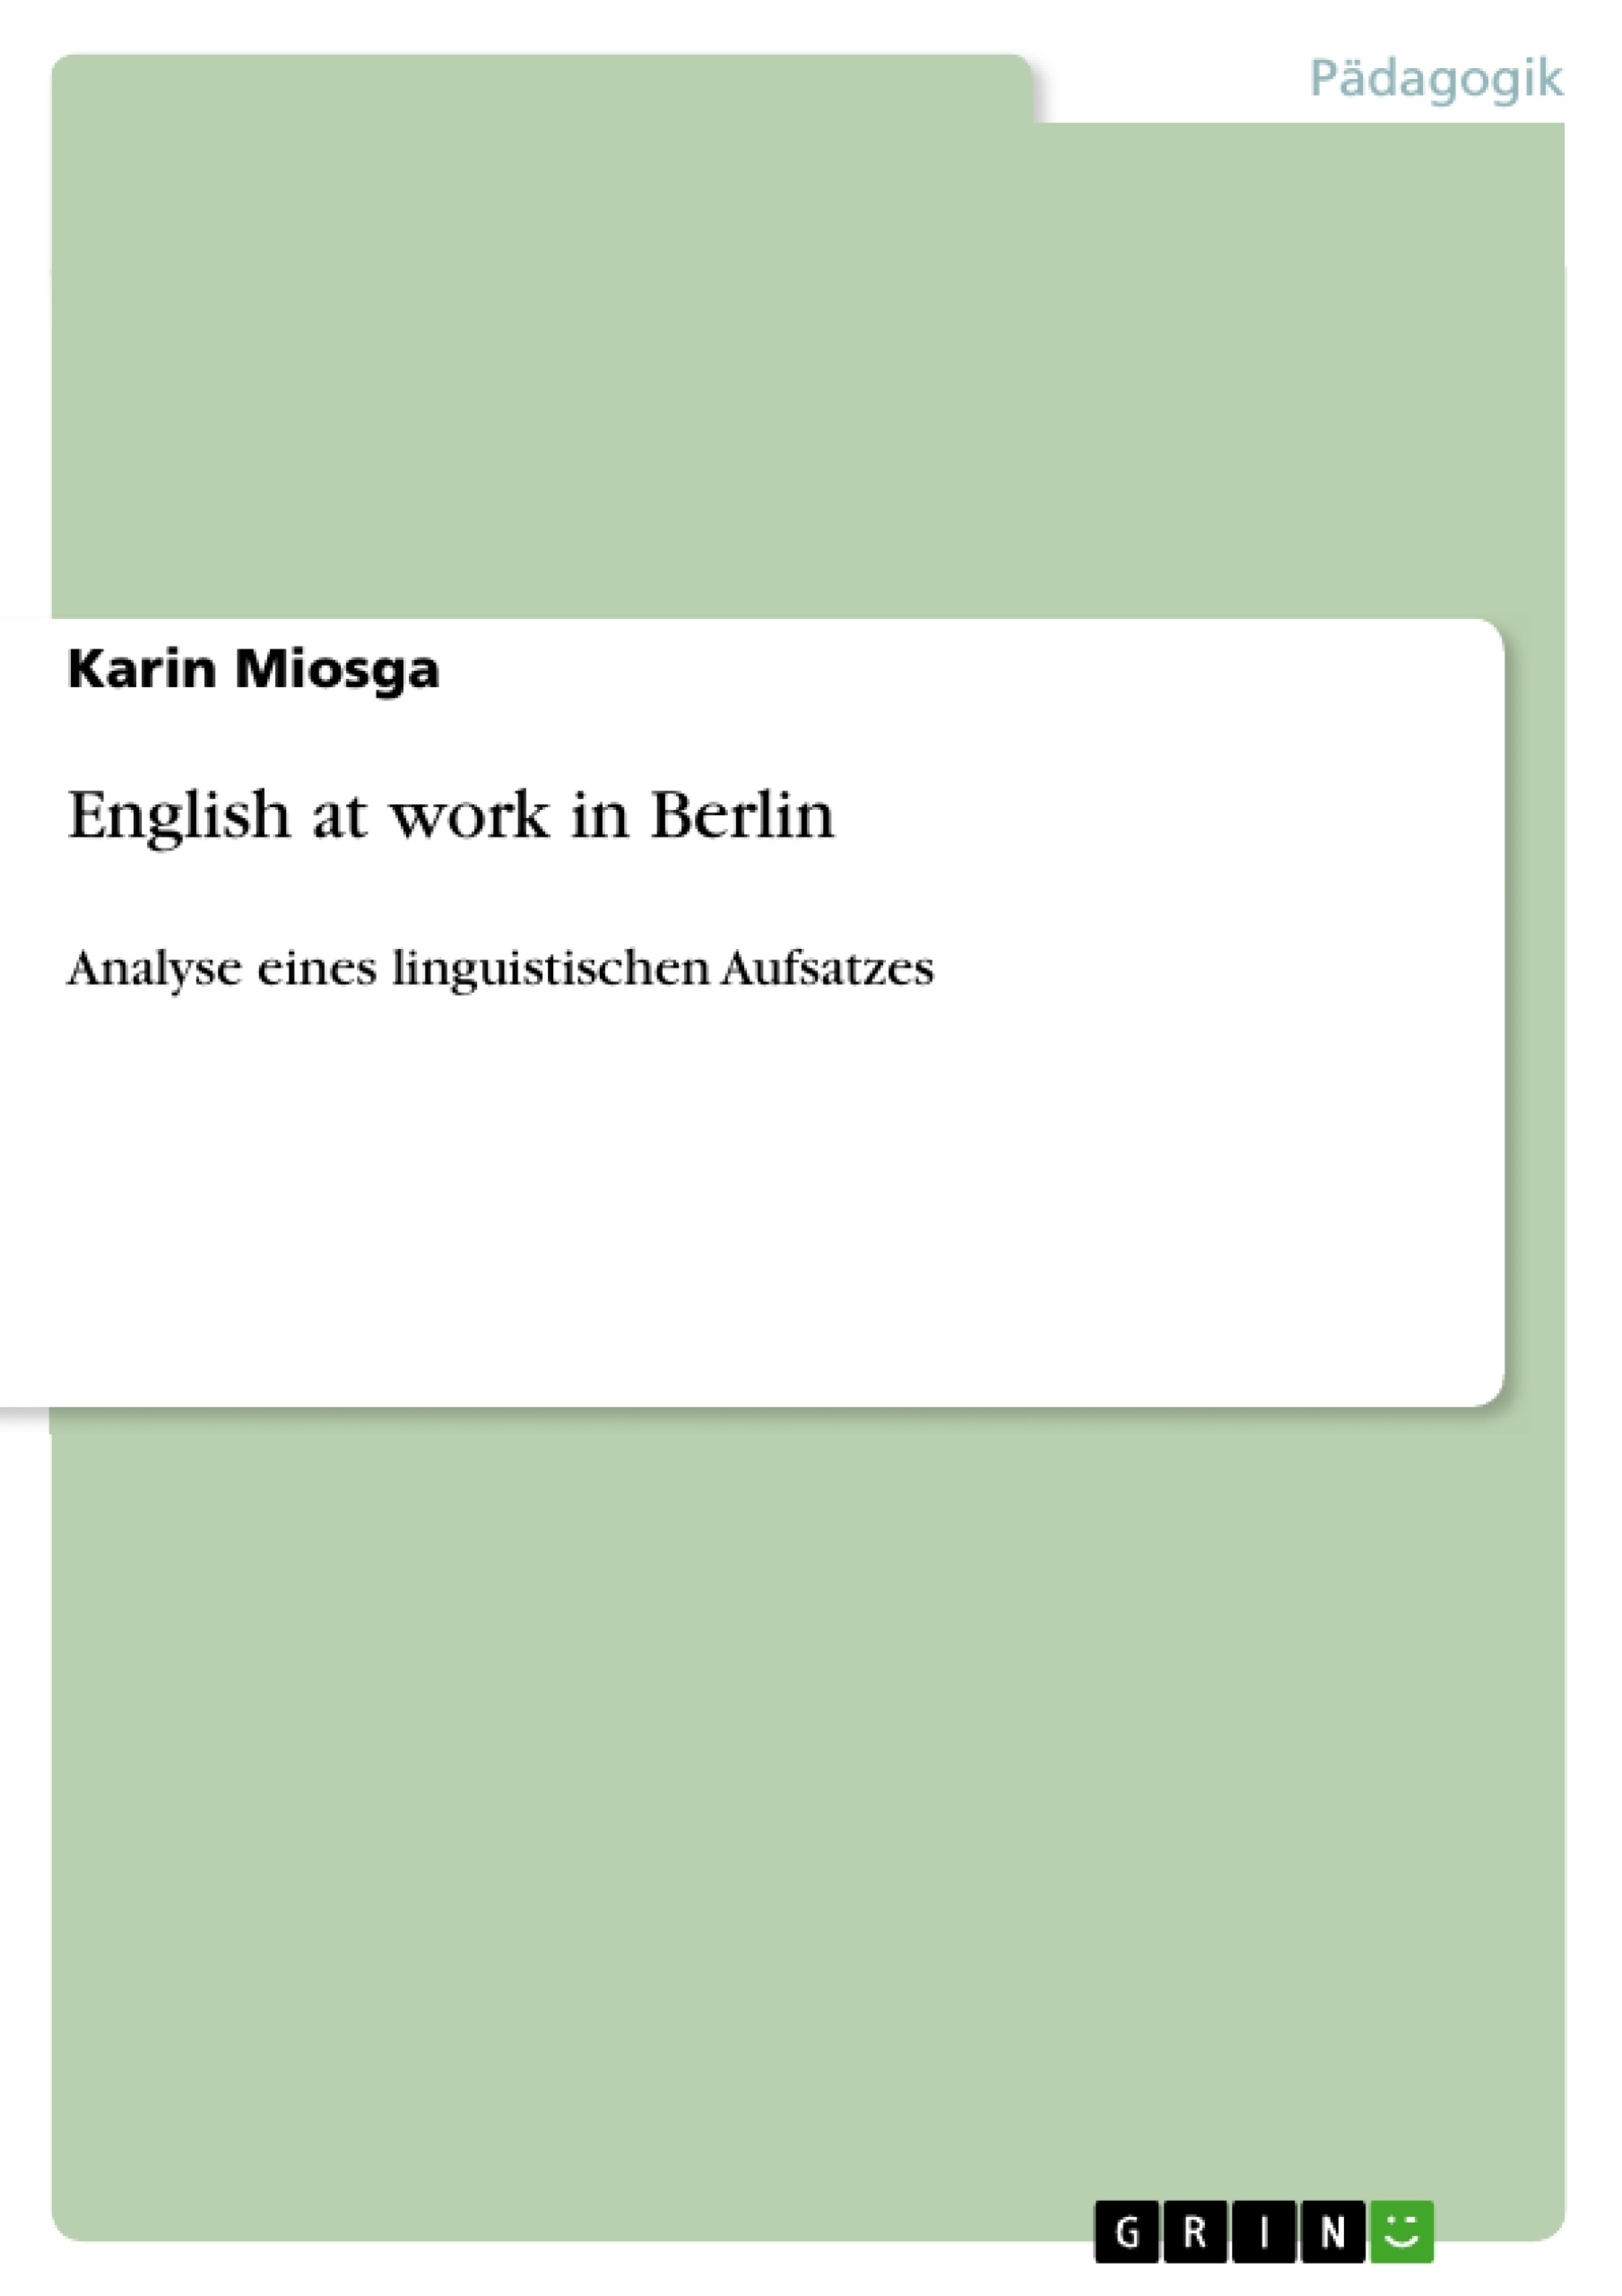 Título: English at work in Berlin 